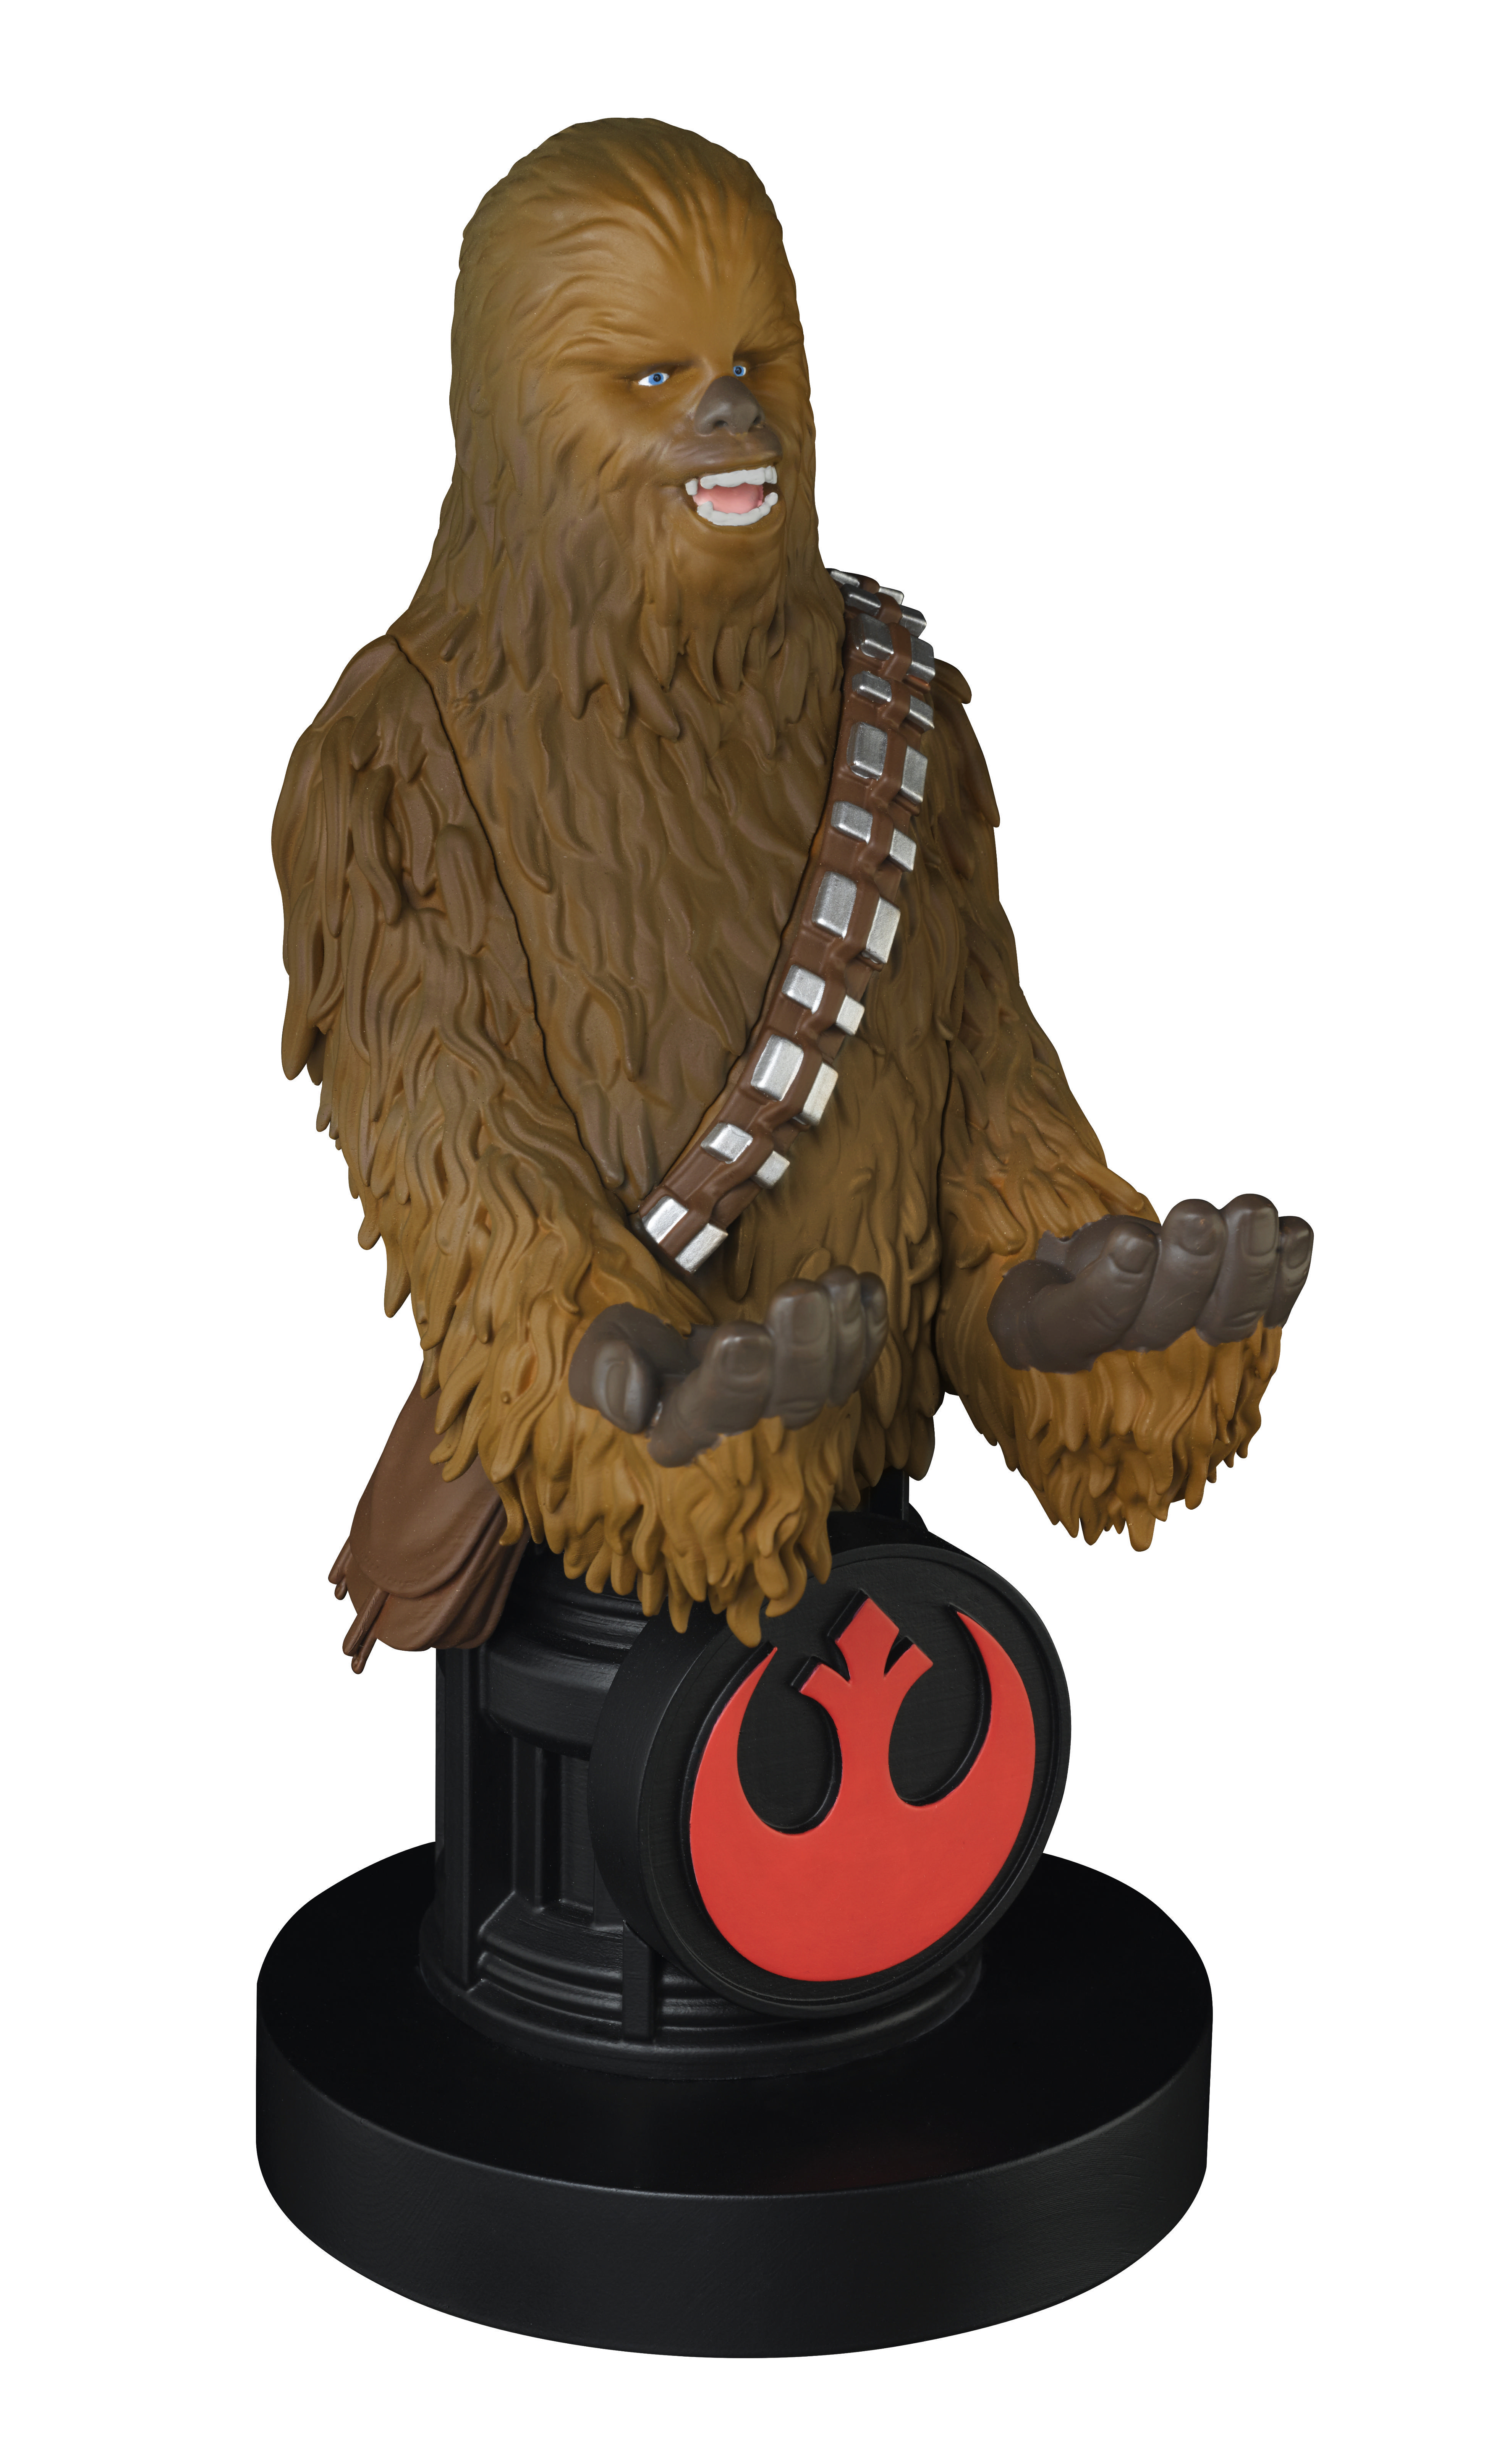 Phonehalterung Cable CABLE oder Controller- Guy GUYS Chewbacca